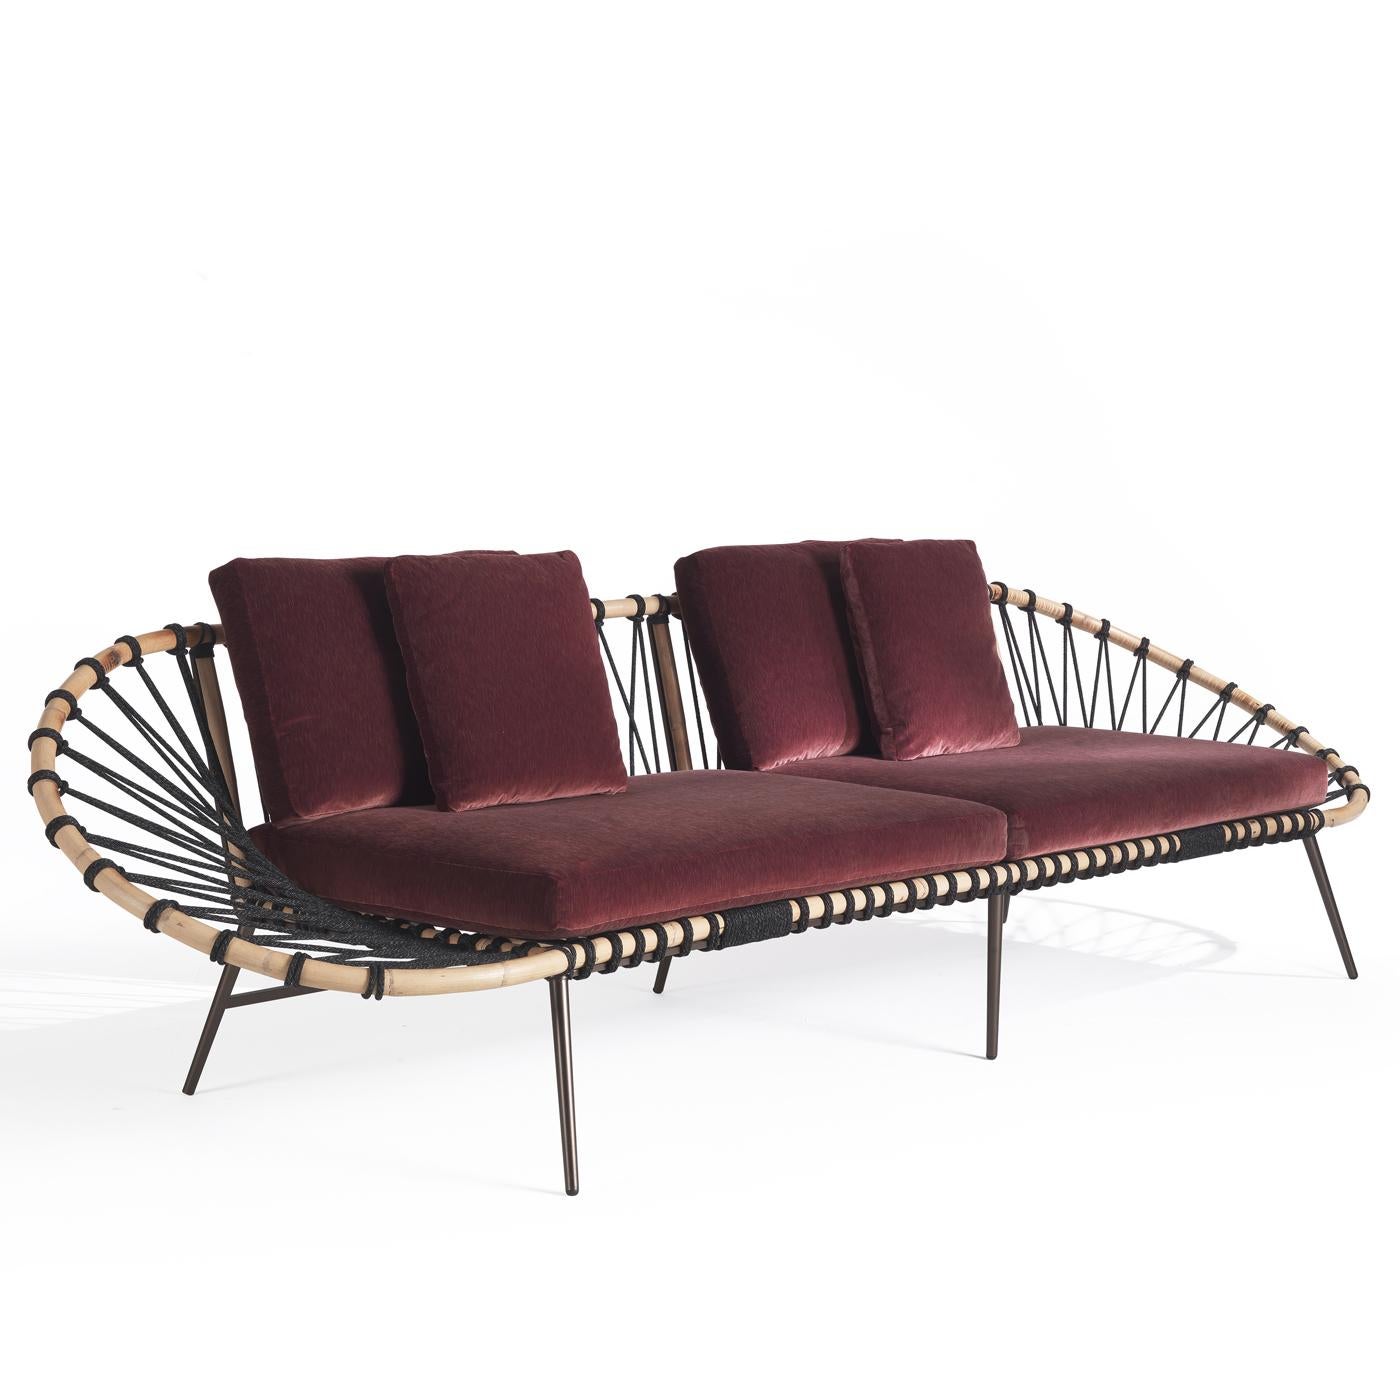 The result of masterful and innovative craftsmanship, this sofa is a strikingly unique piece of design. Resting on metal, slanted feet, its captivating structure is composed of an oval-shaped reed framework covered with braided black rope. The seat